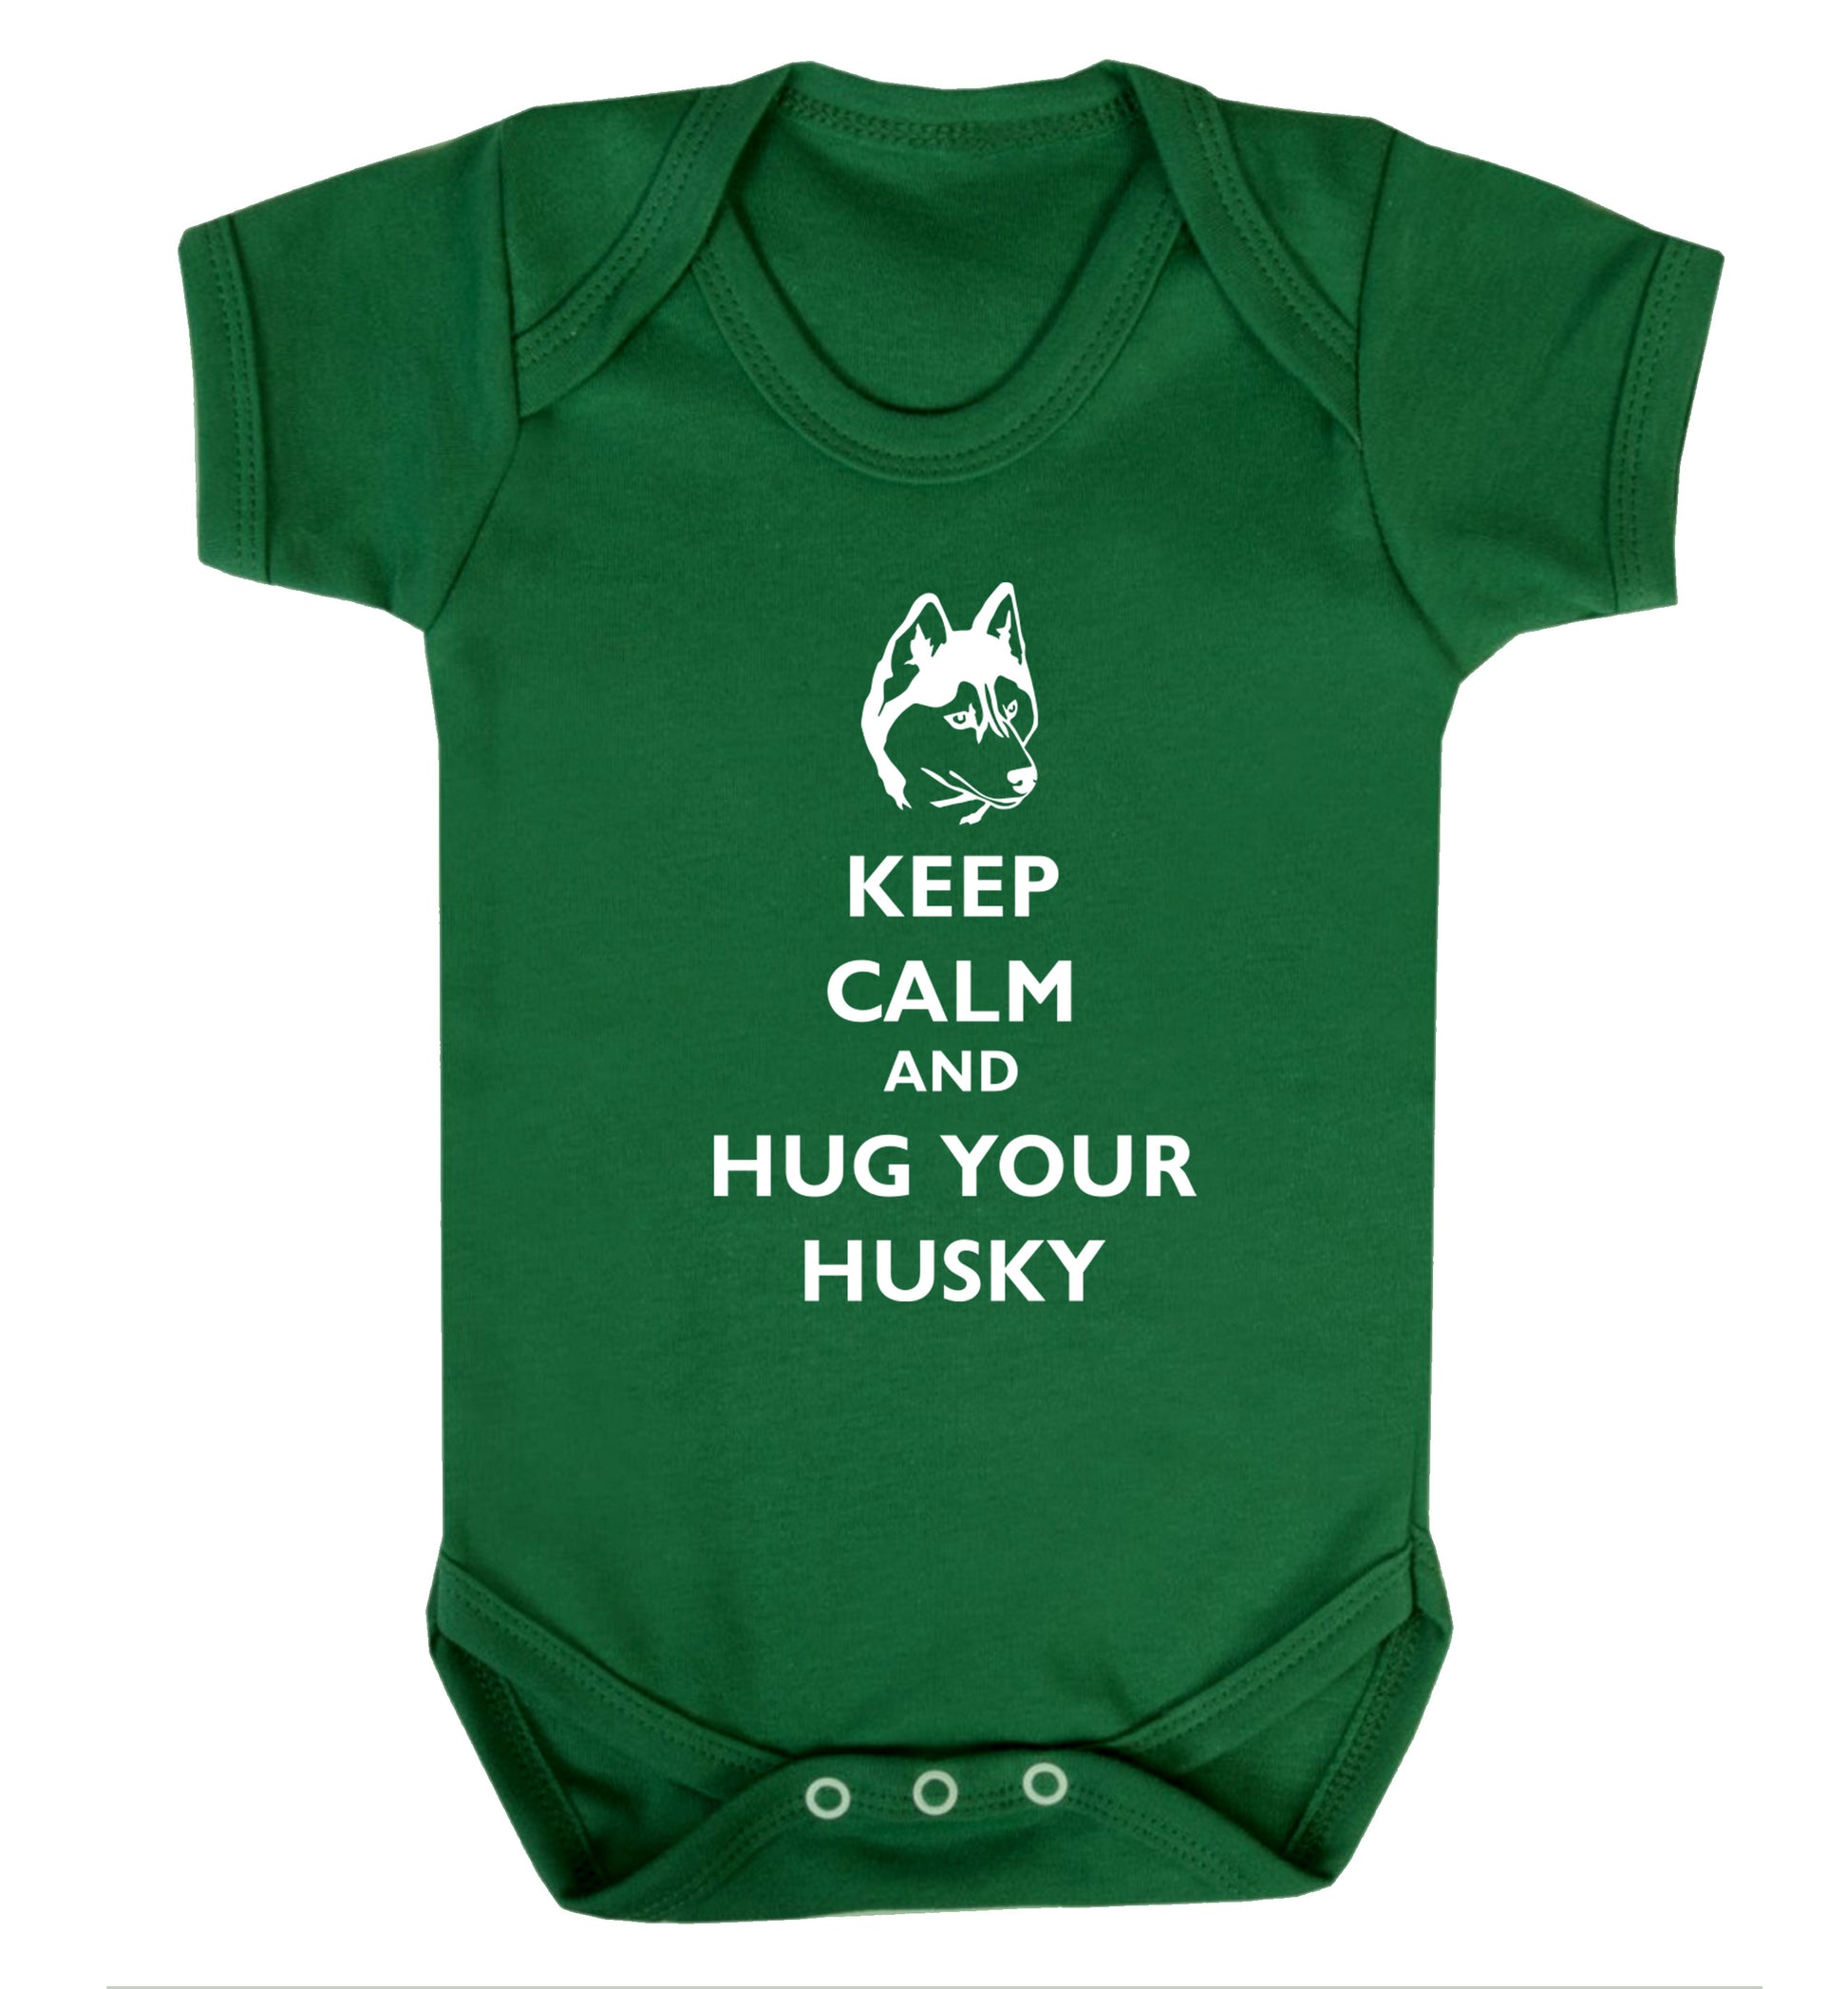 Keep calm and hug your husky Baby Vest green 18-24 months